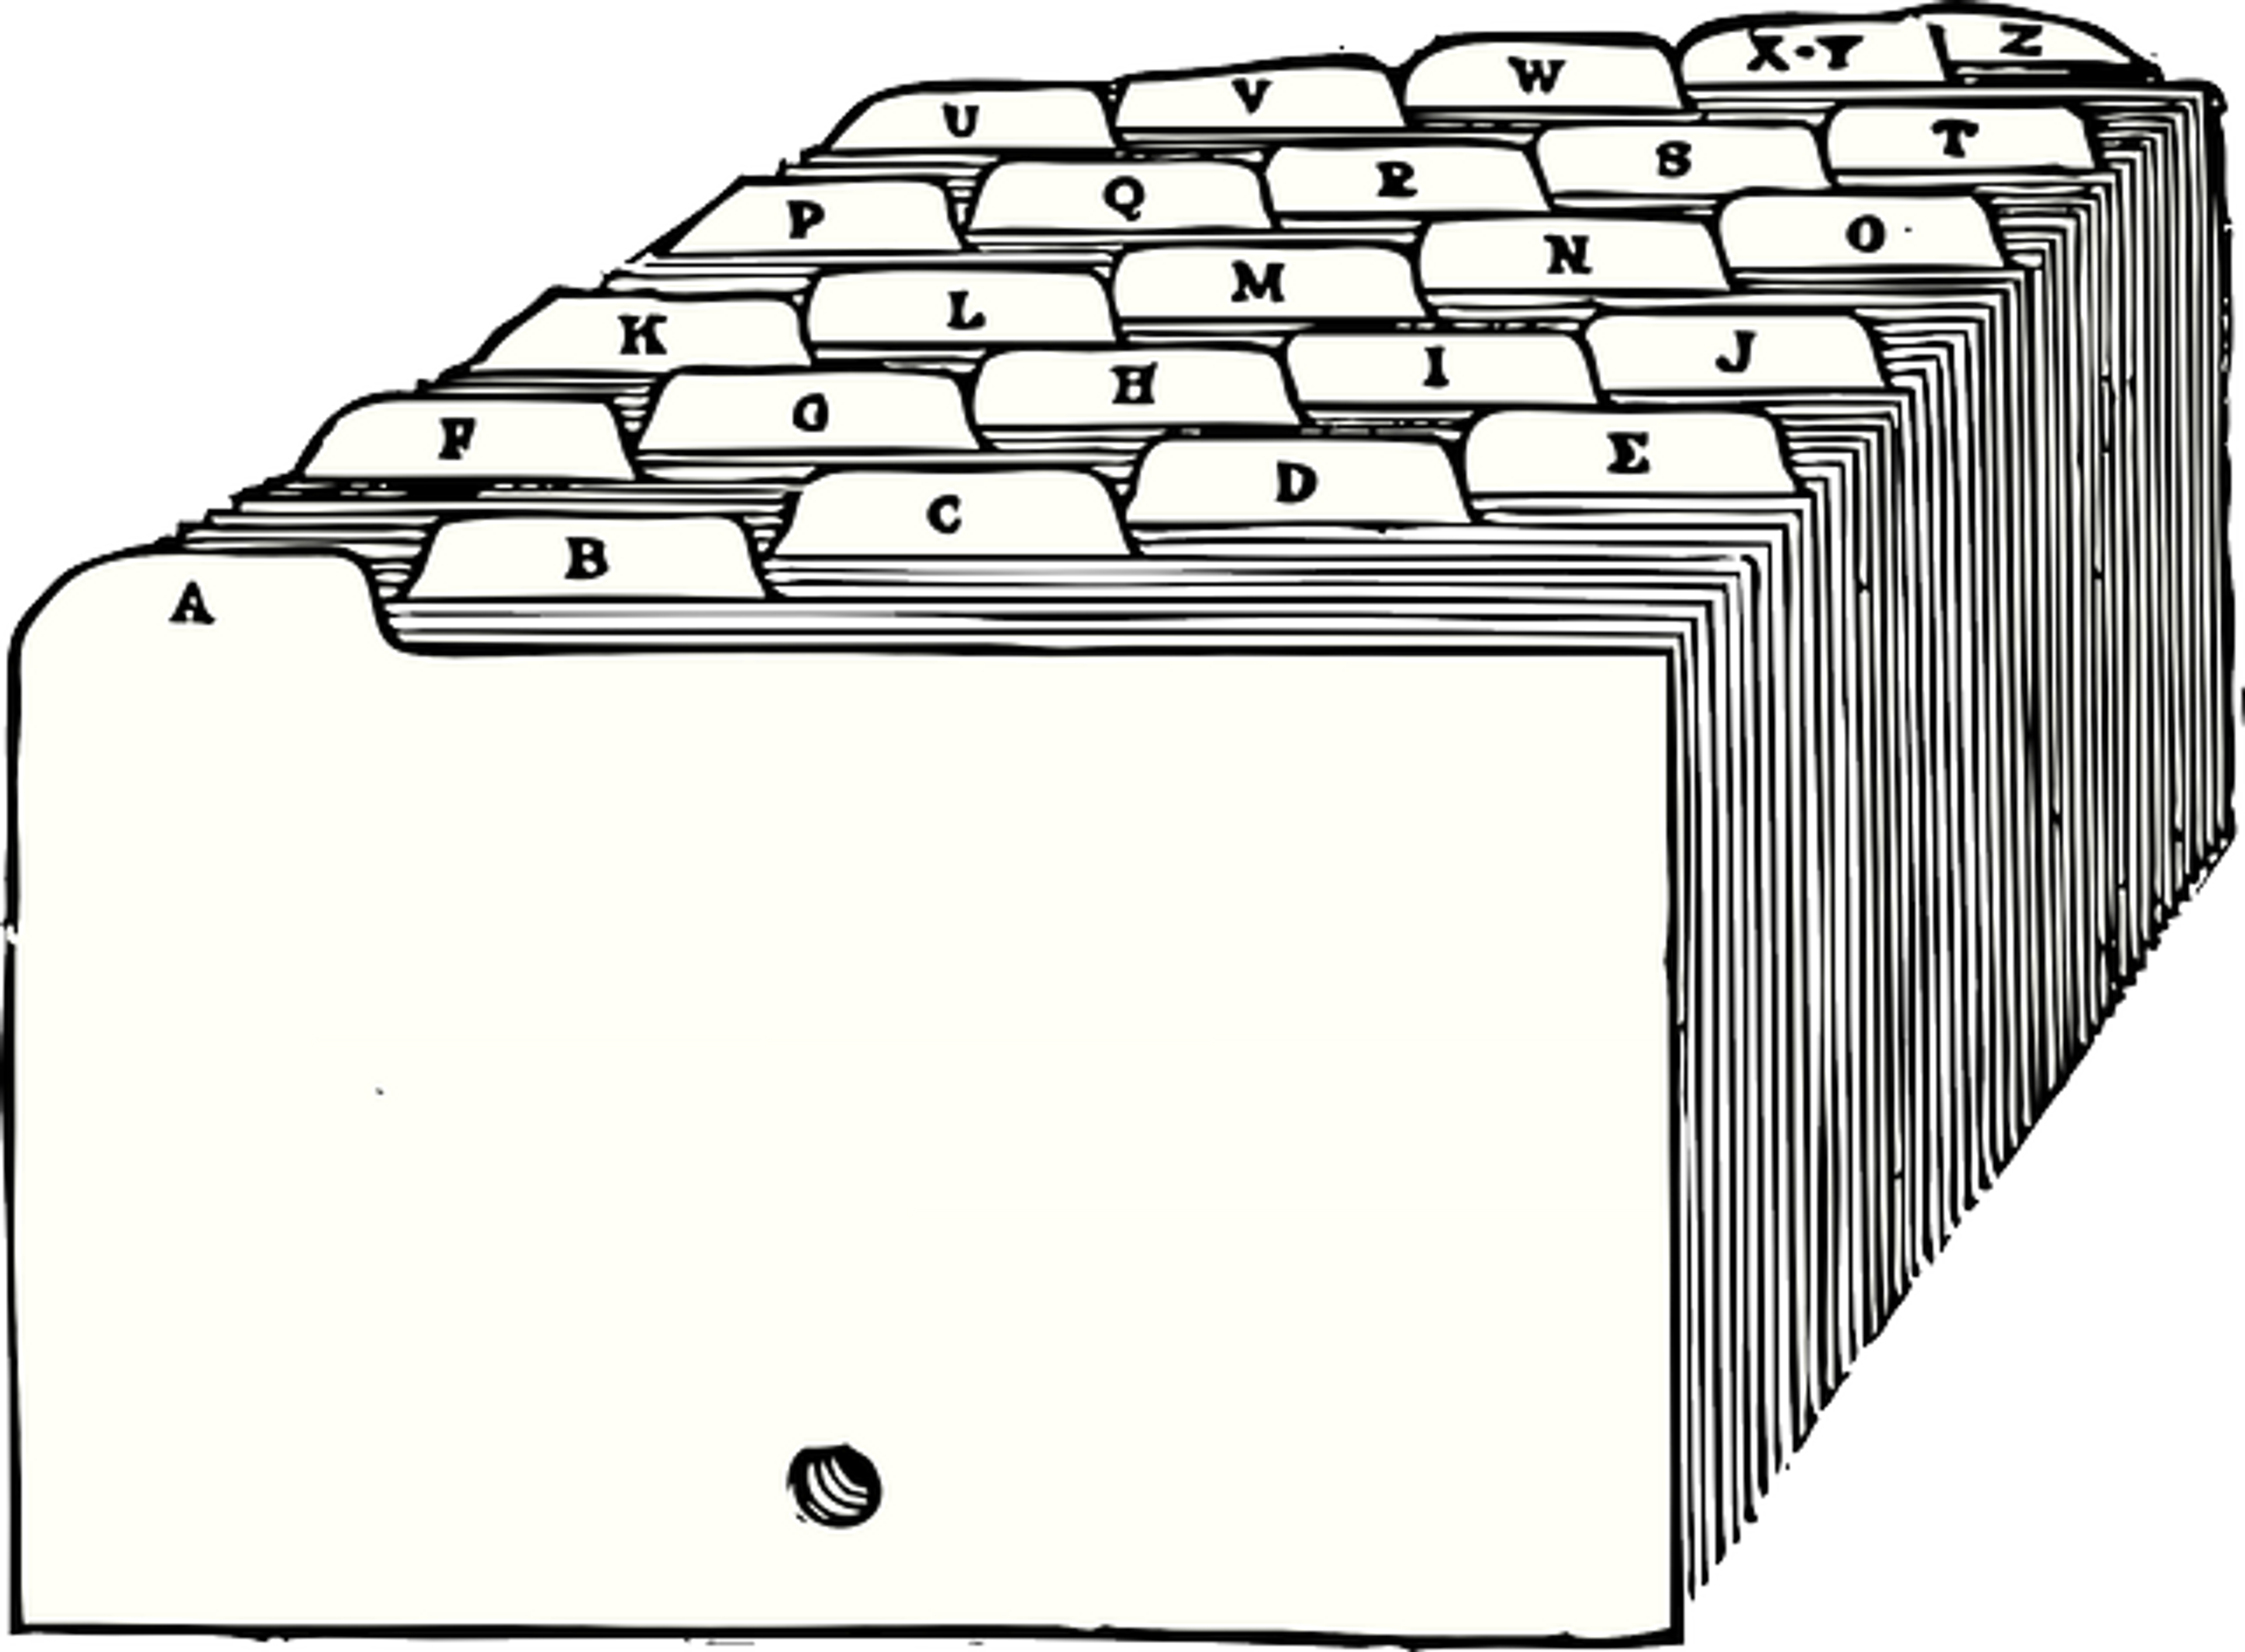 An image of files